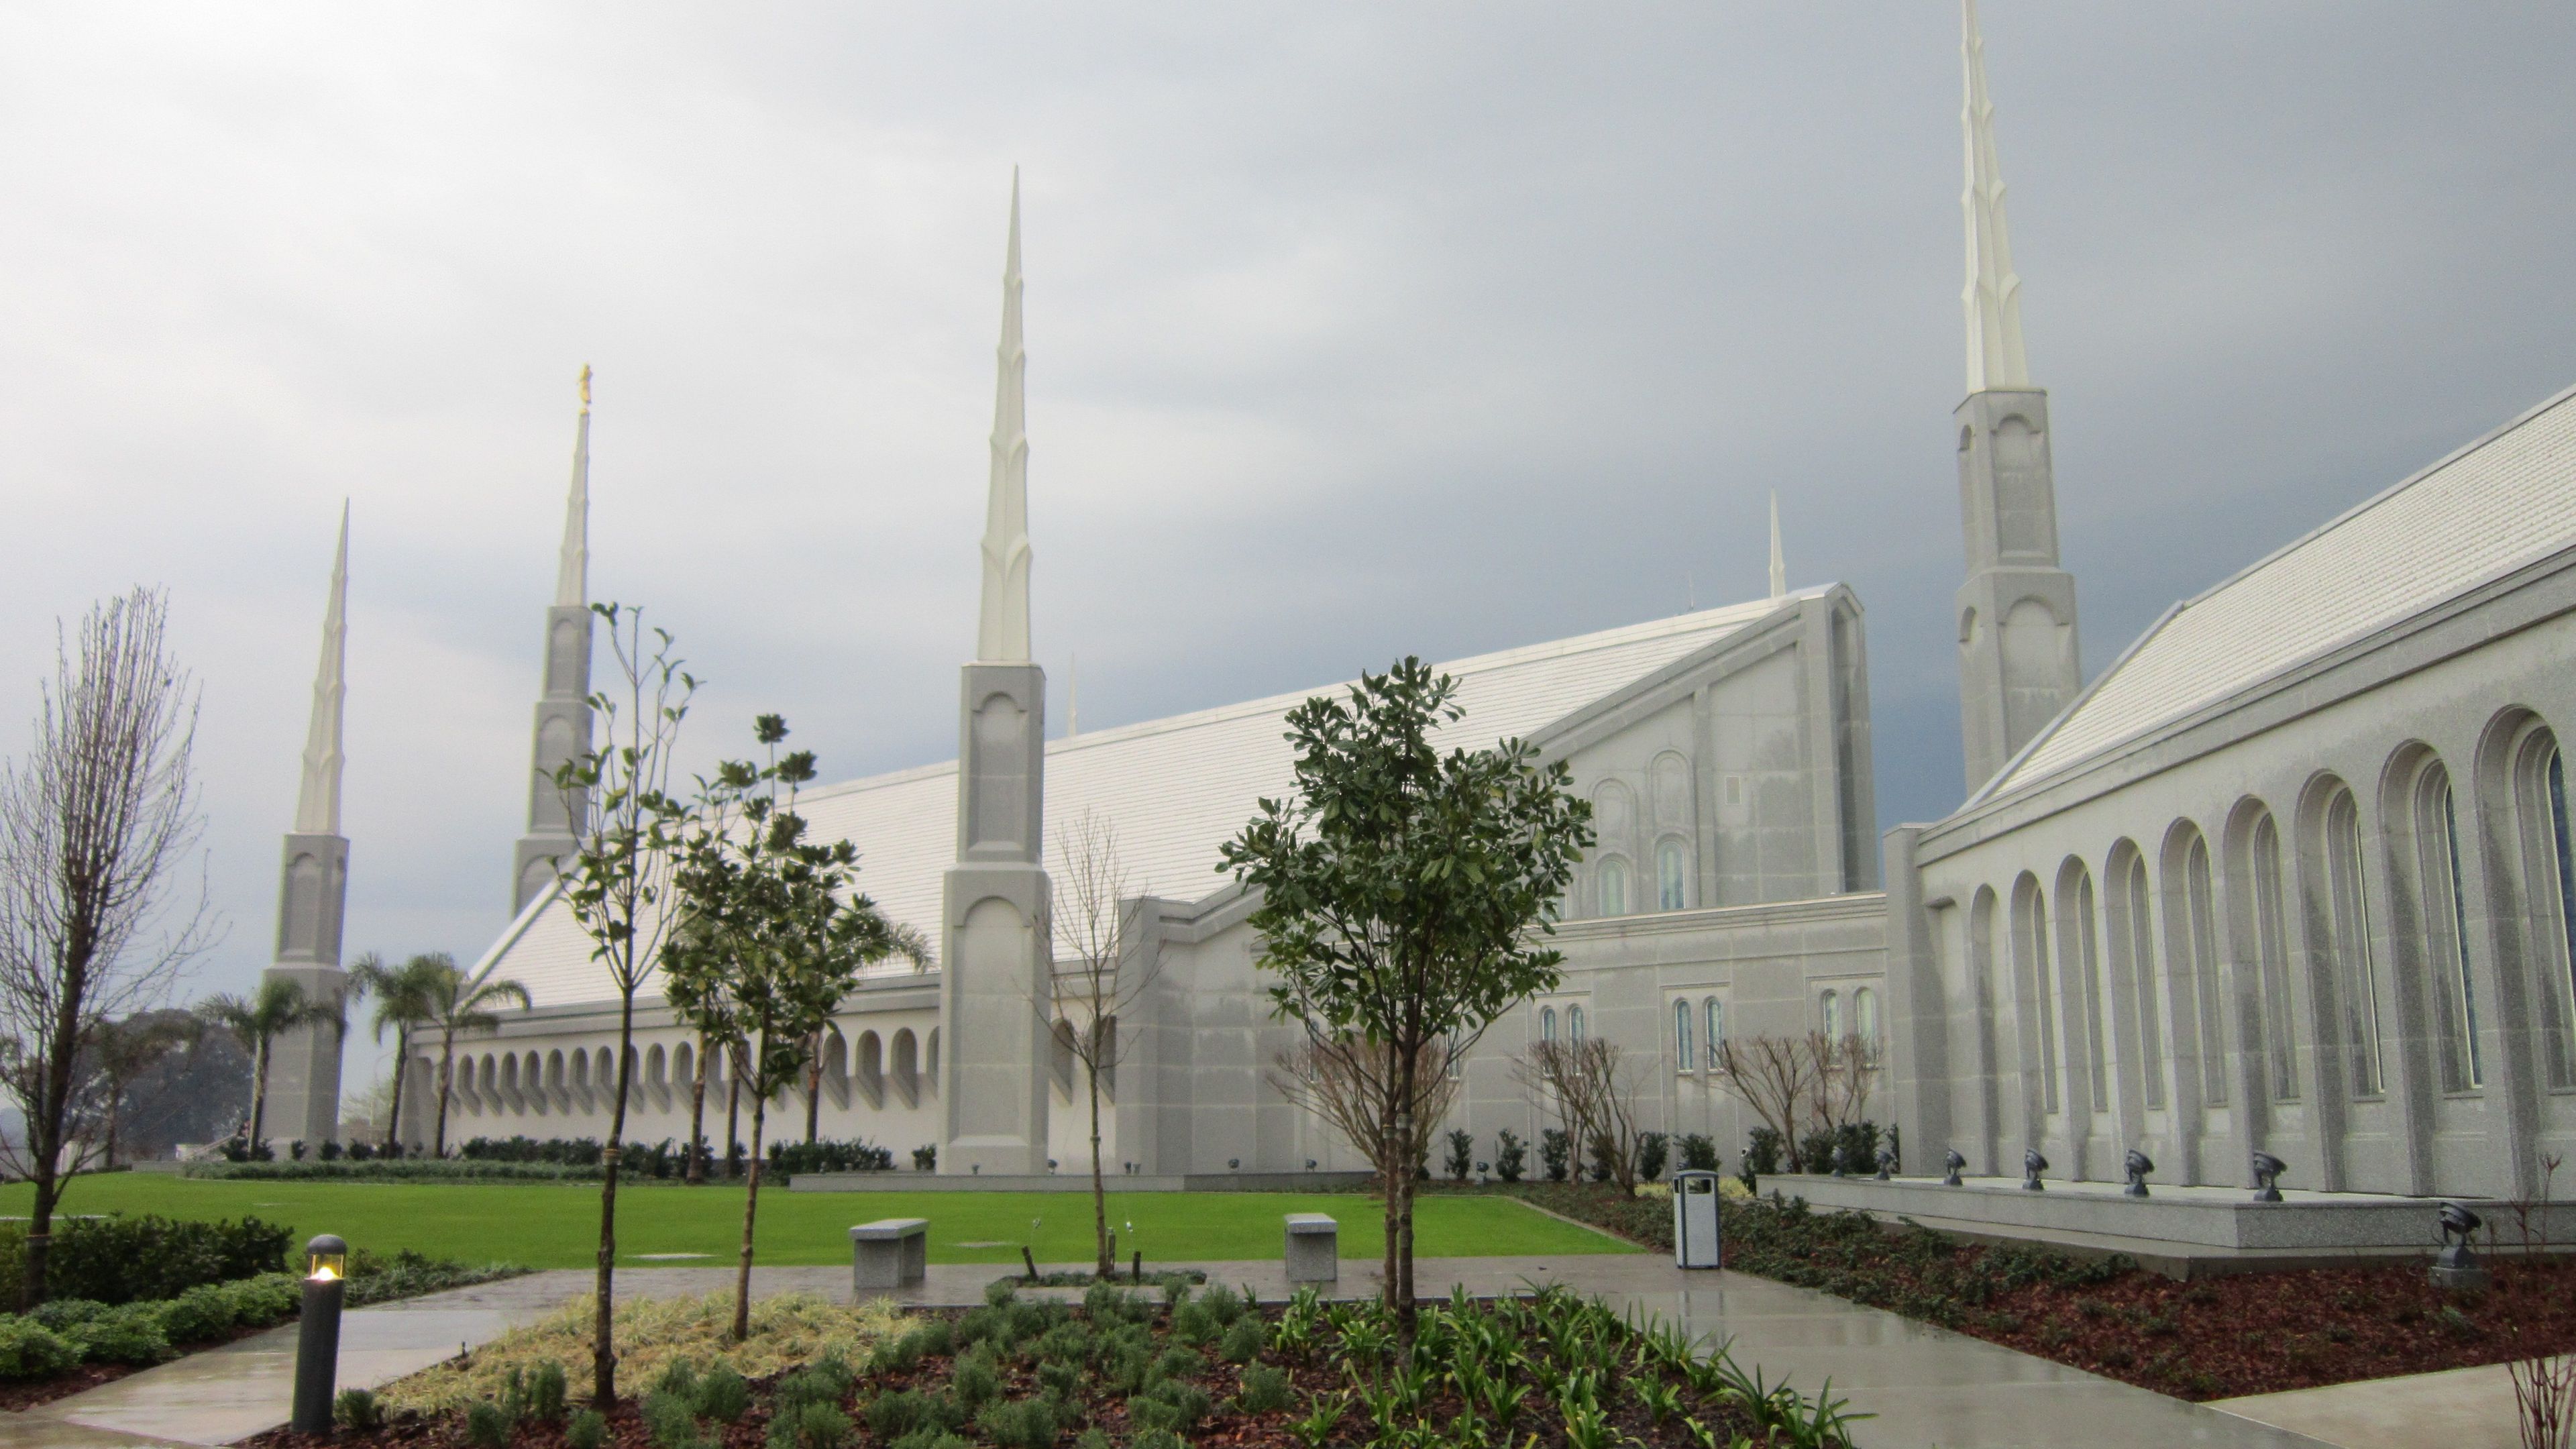 A view of the Buenos Aires Argentina Temple from the temple grounds.